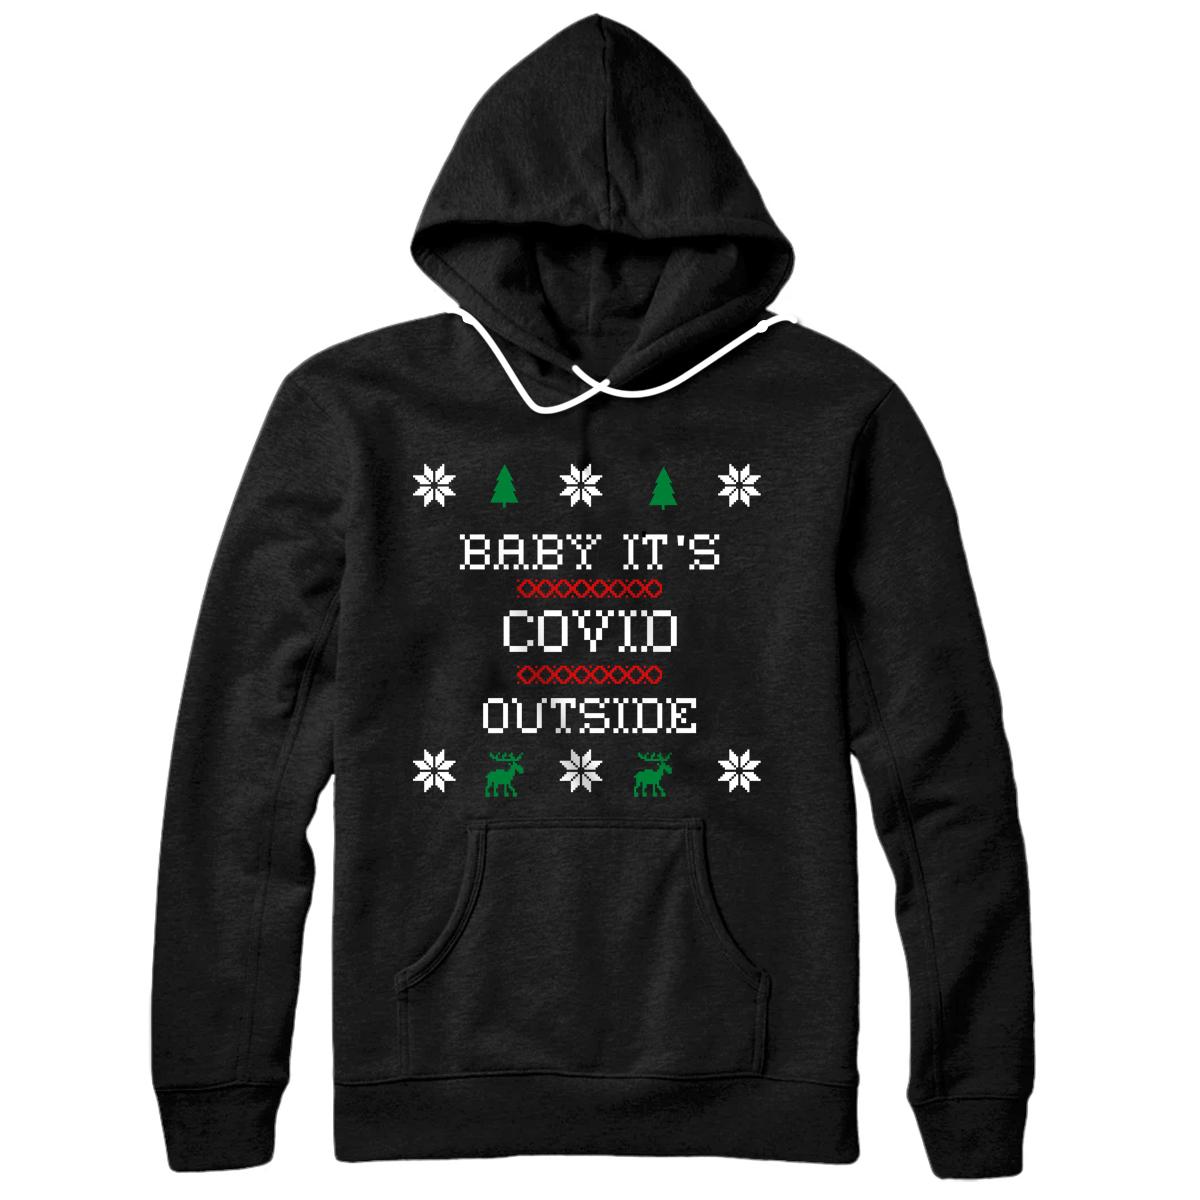 Personalized Christmas 2020 Baby It's C.O.V.I.D. Outside Pullover Hoodie